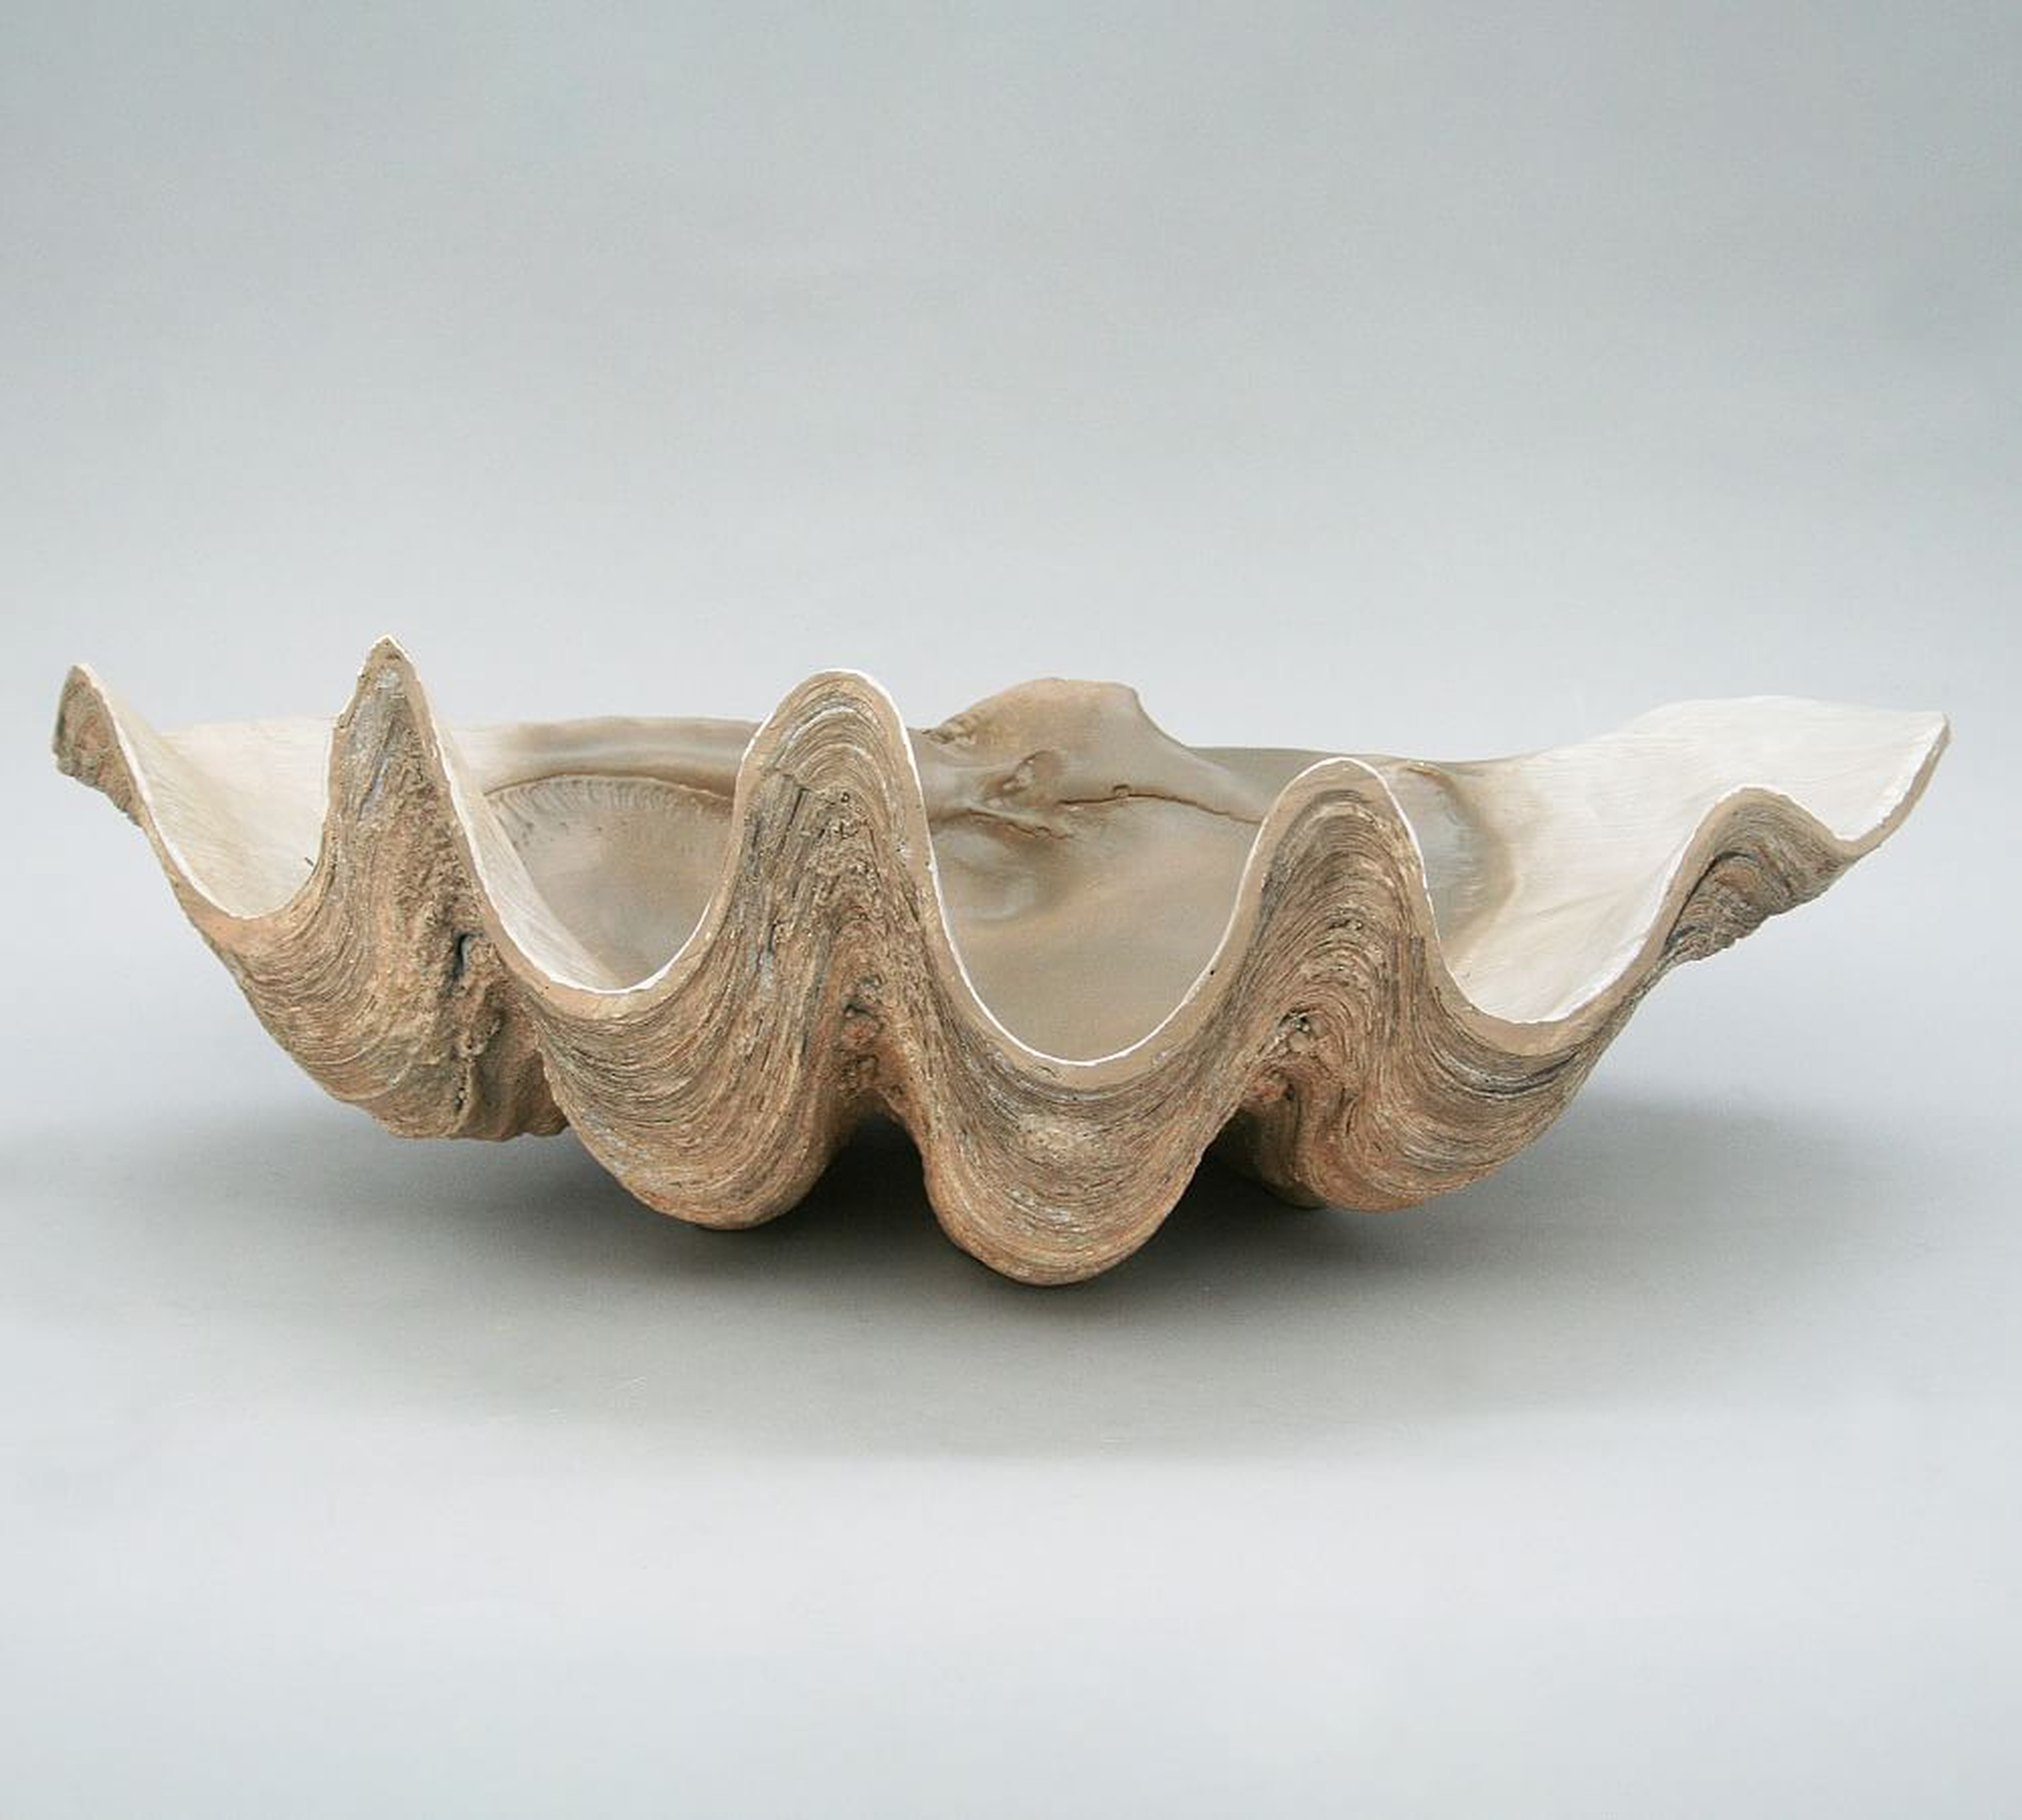 Fossilized Clam Decorative Object - Pottery Barn